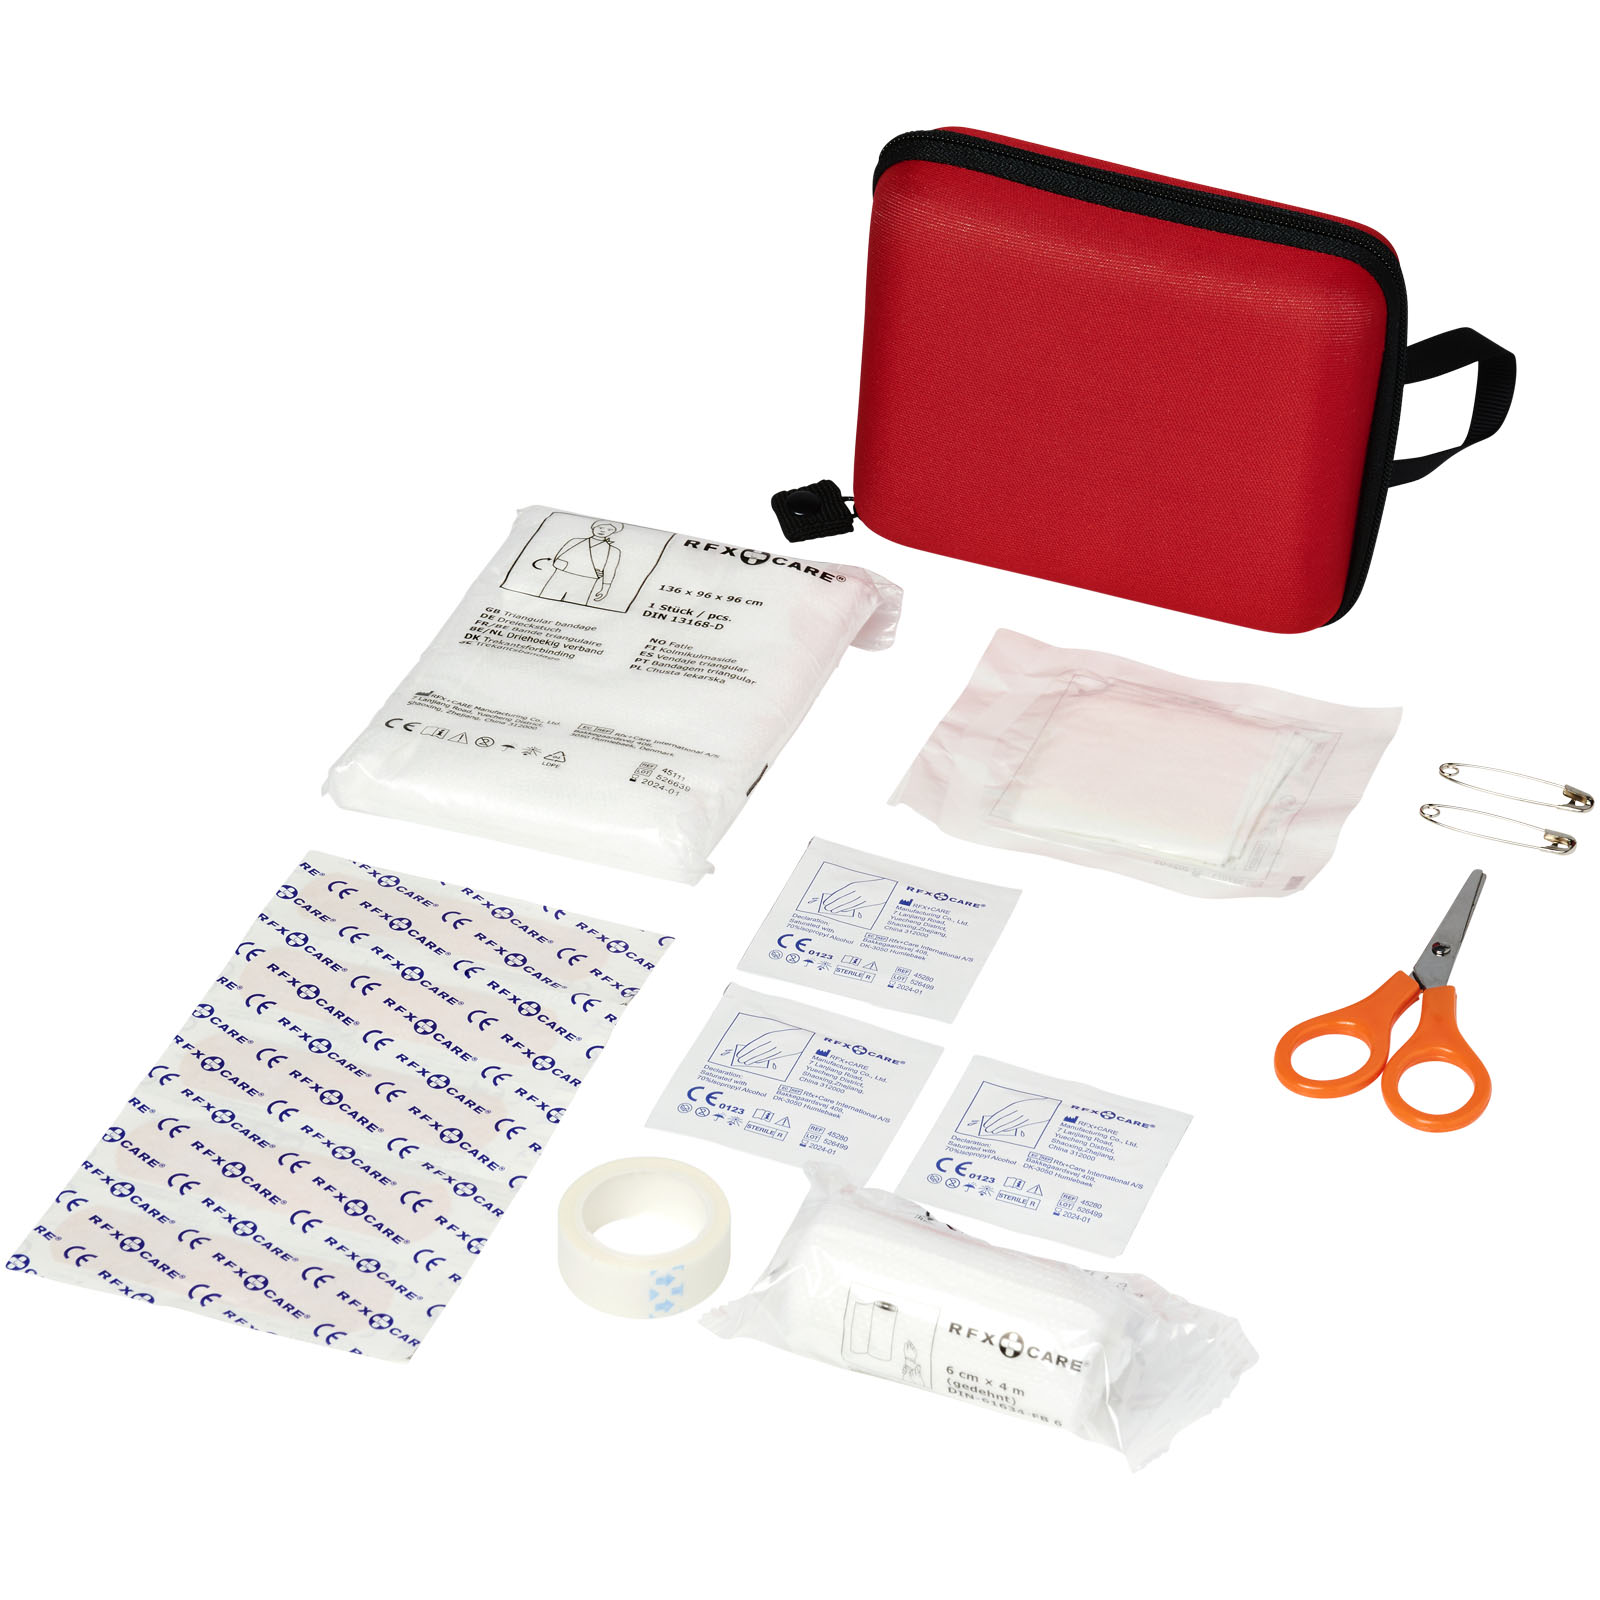 First Aid Kits - Healer 16-piece first aid kit